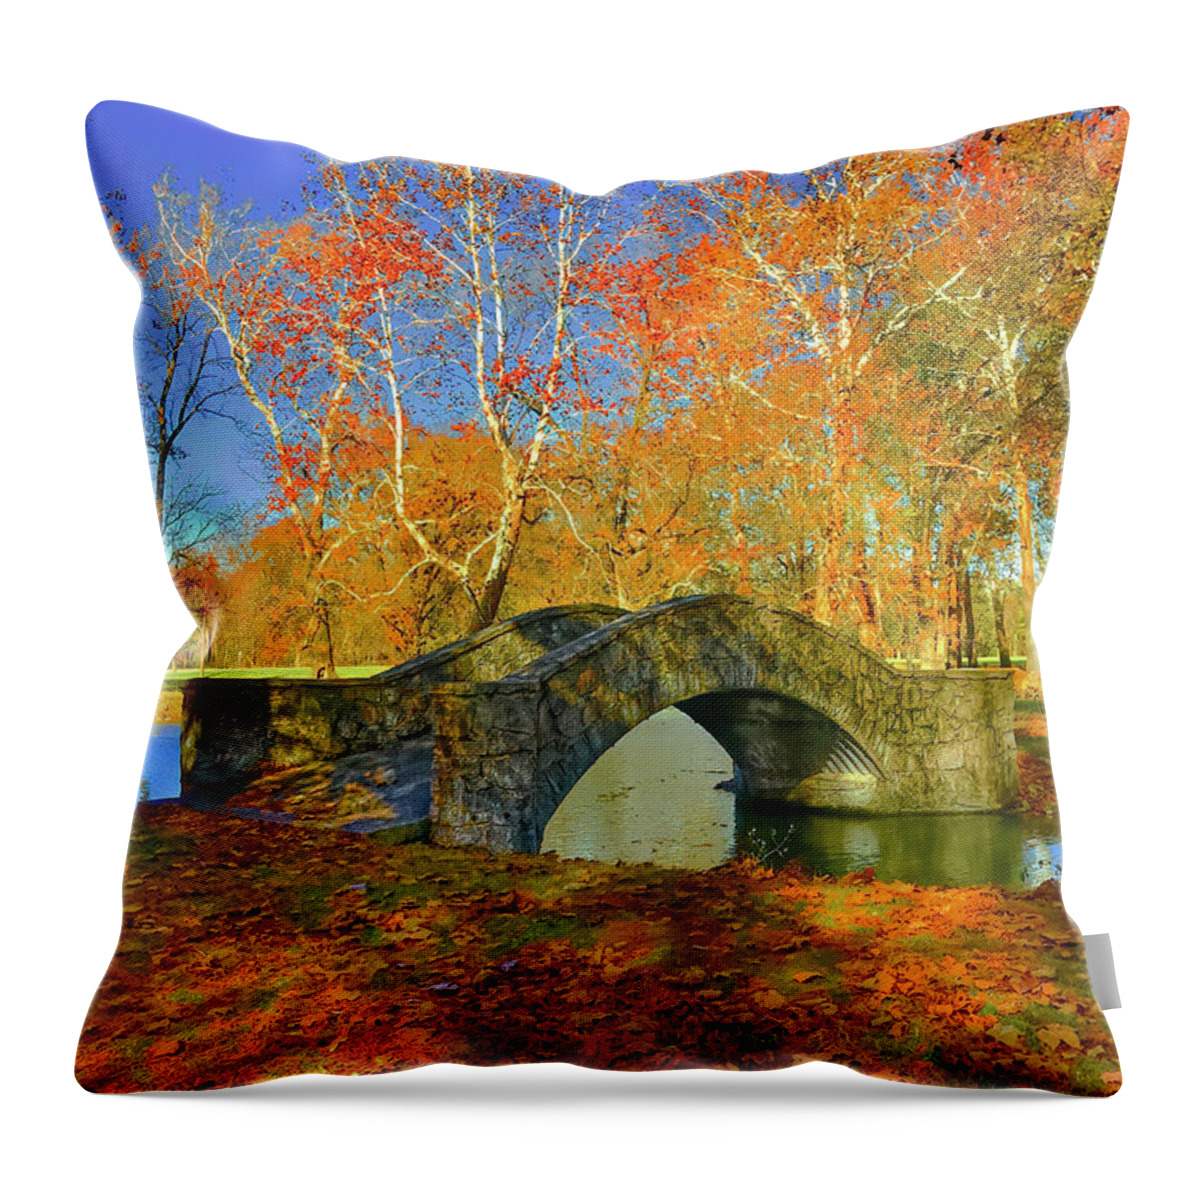  Throw Pillow featuring the photograph Walking Bridge by Jack Wilson